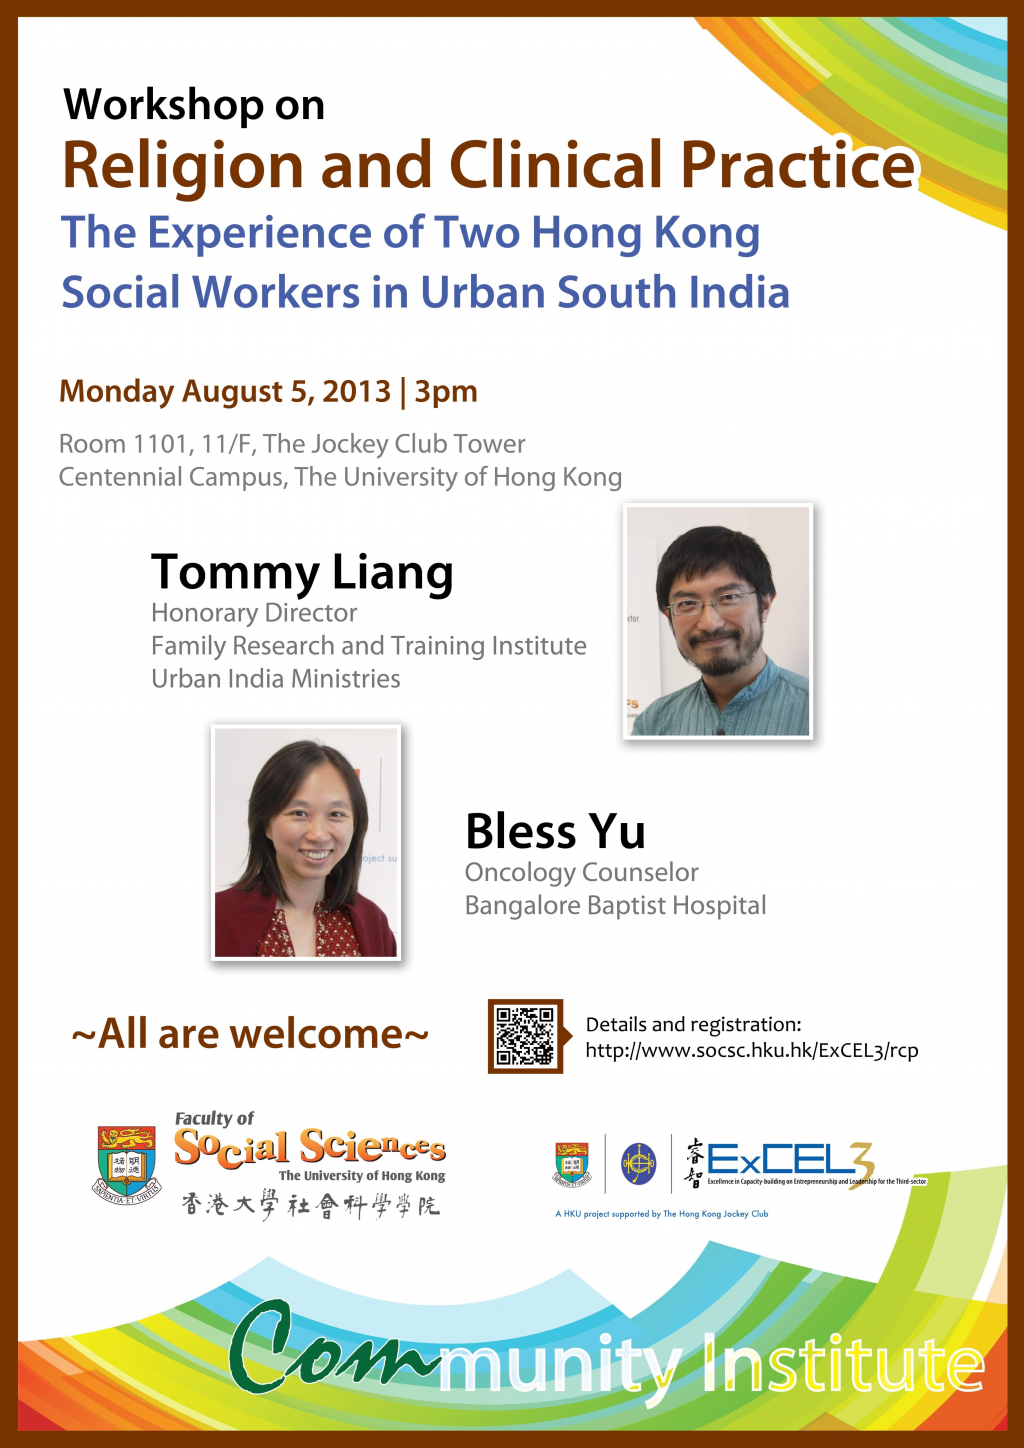 Workshop on Religion and Clinical Practice: The Experience of Two Hong Kong Social Workers in Urban South India 